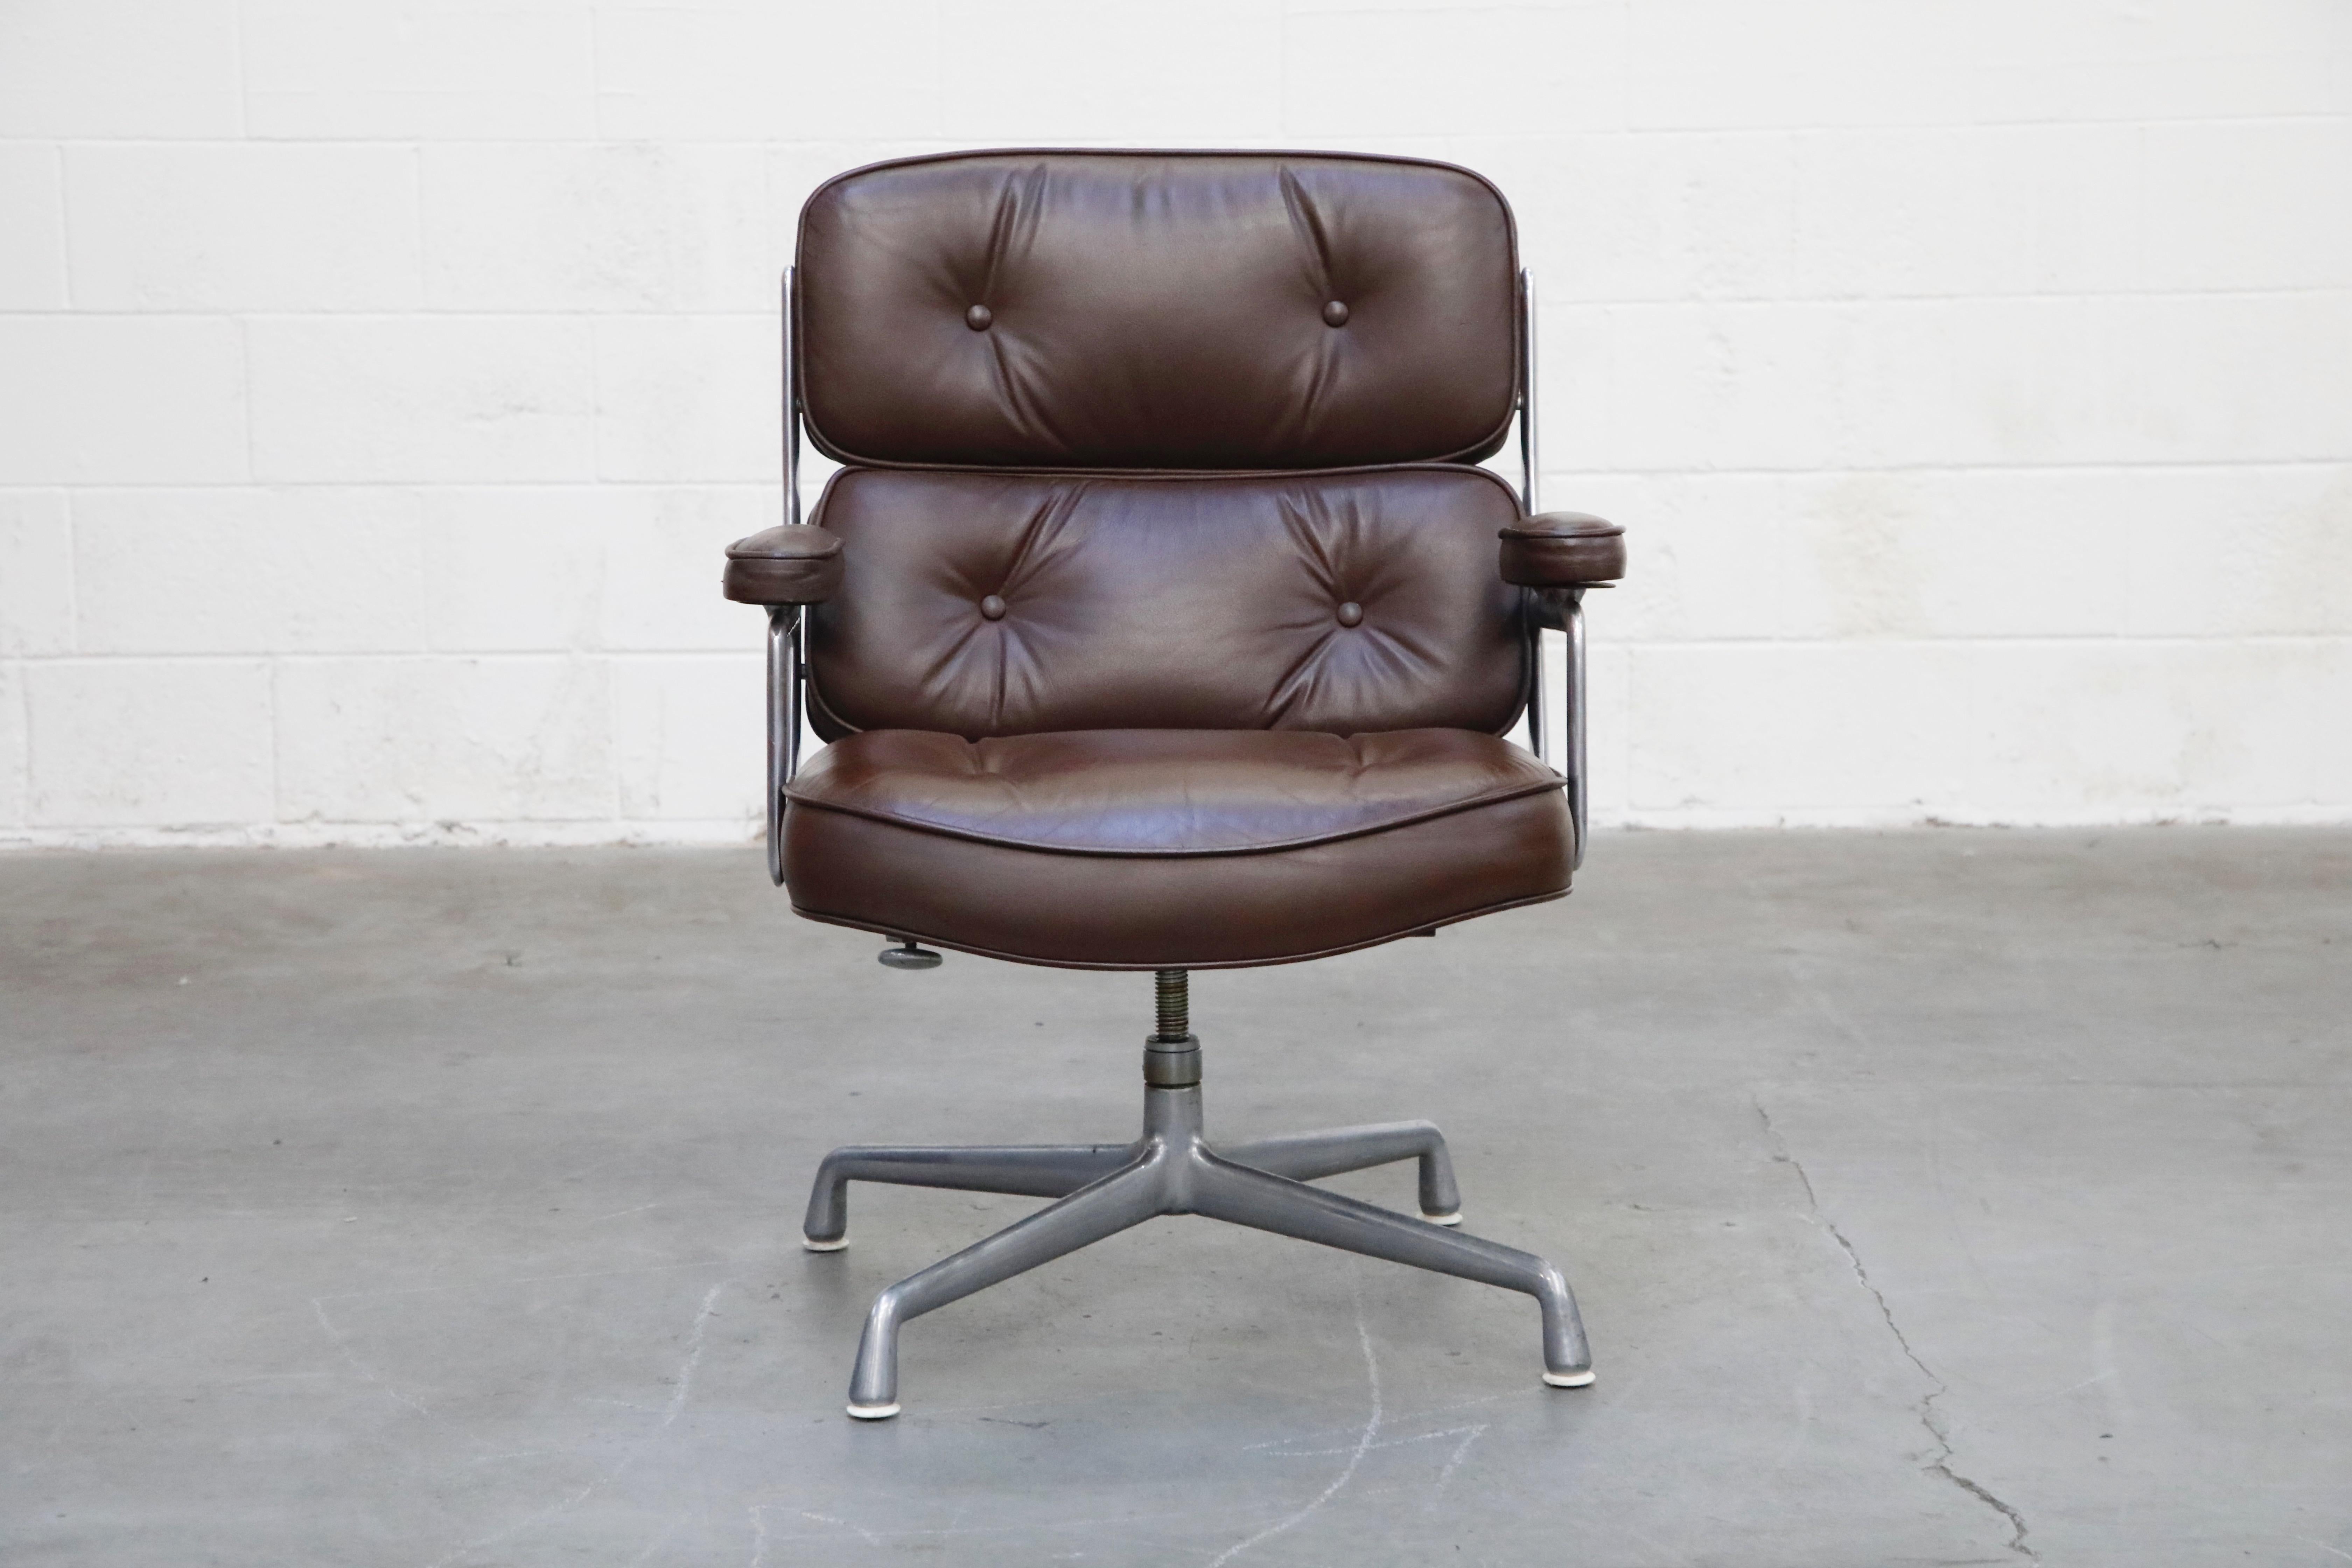 These incredible deep brown leather 'Time Life' executive swivel lounge chairs were designed by Charles and Ray Eames in 1959 and manufactured by Herman Miller. Known to be the most comfortable and ergonomic executive chair, these Time Life